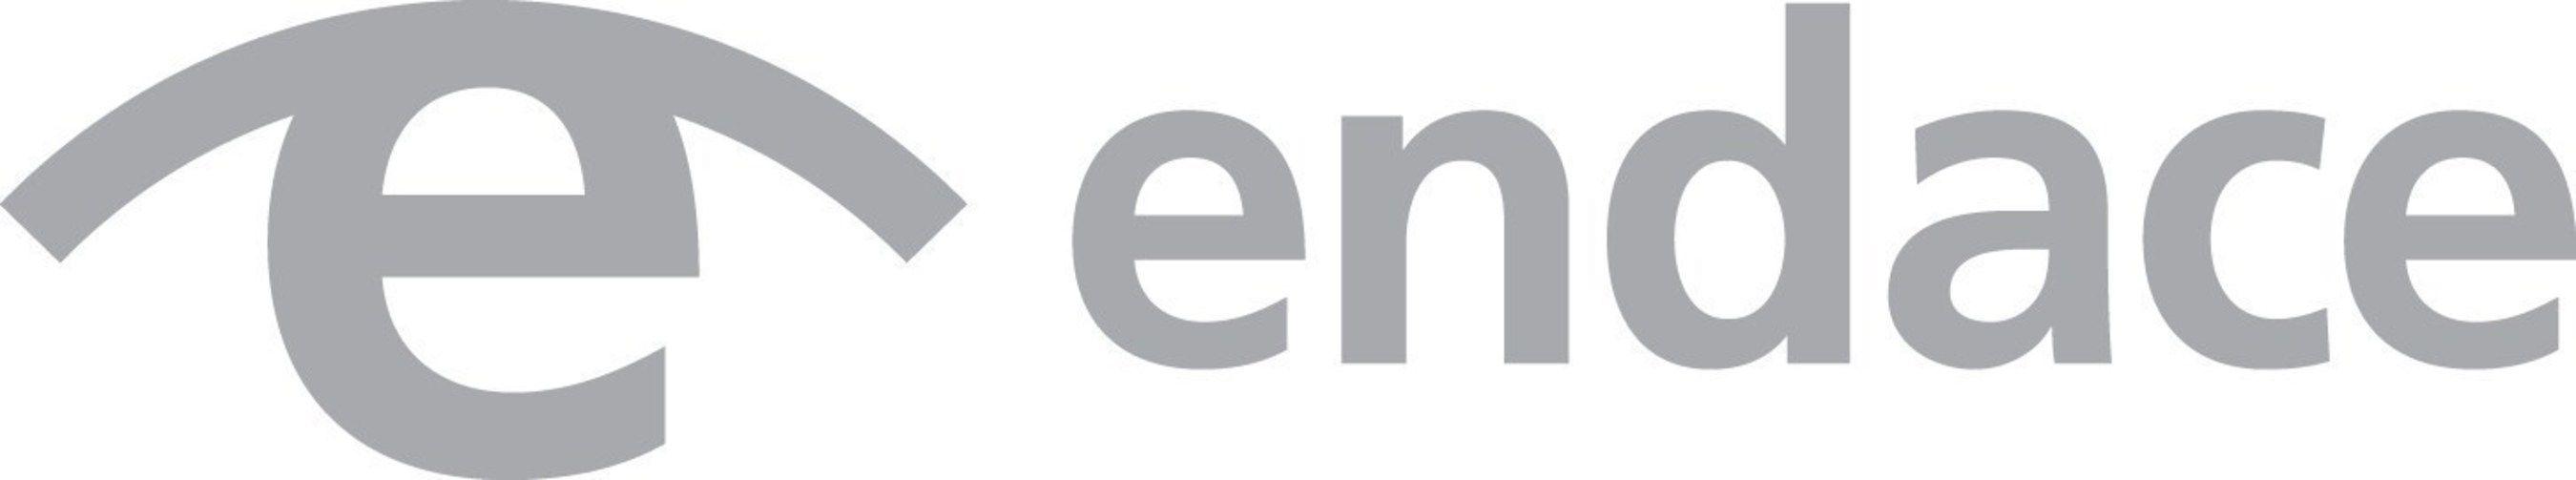 Emulex Logo - Endace Spins off from Emulex in Management-led Buyout